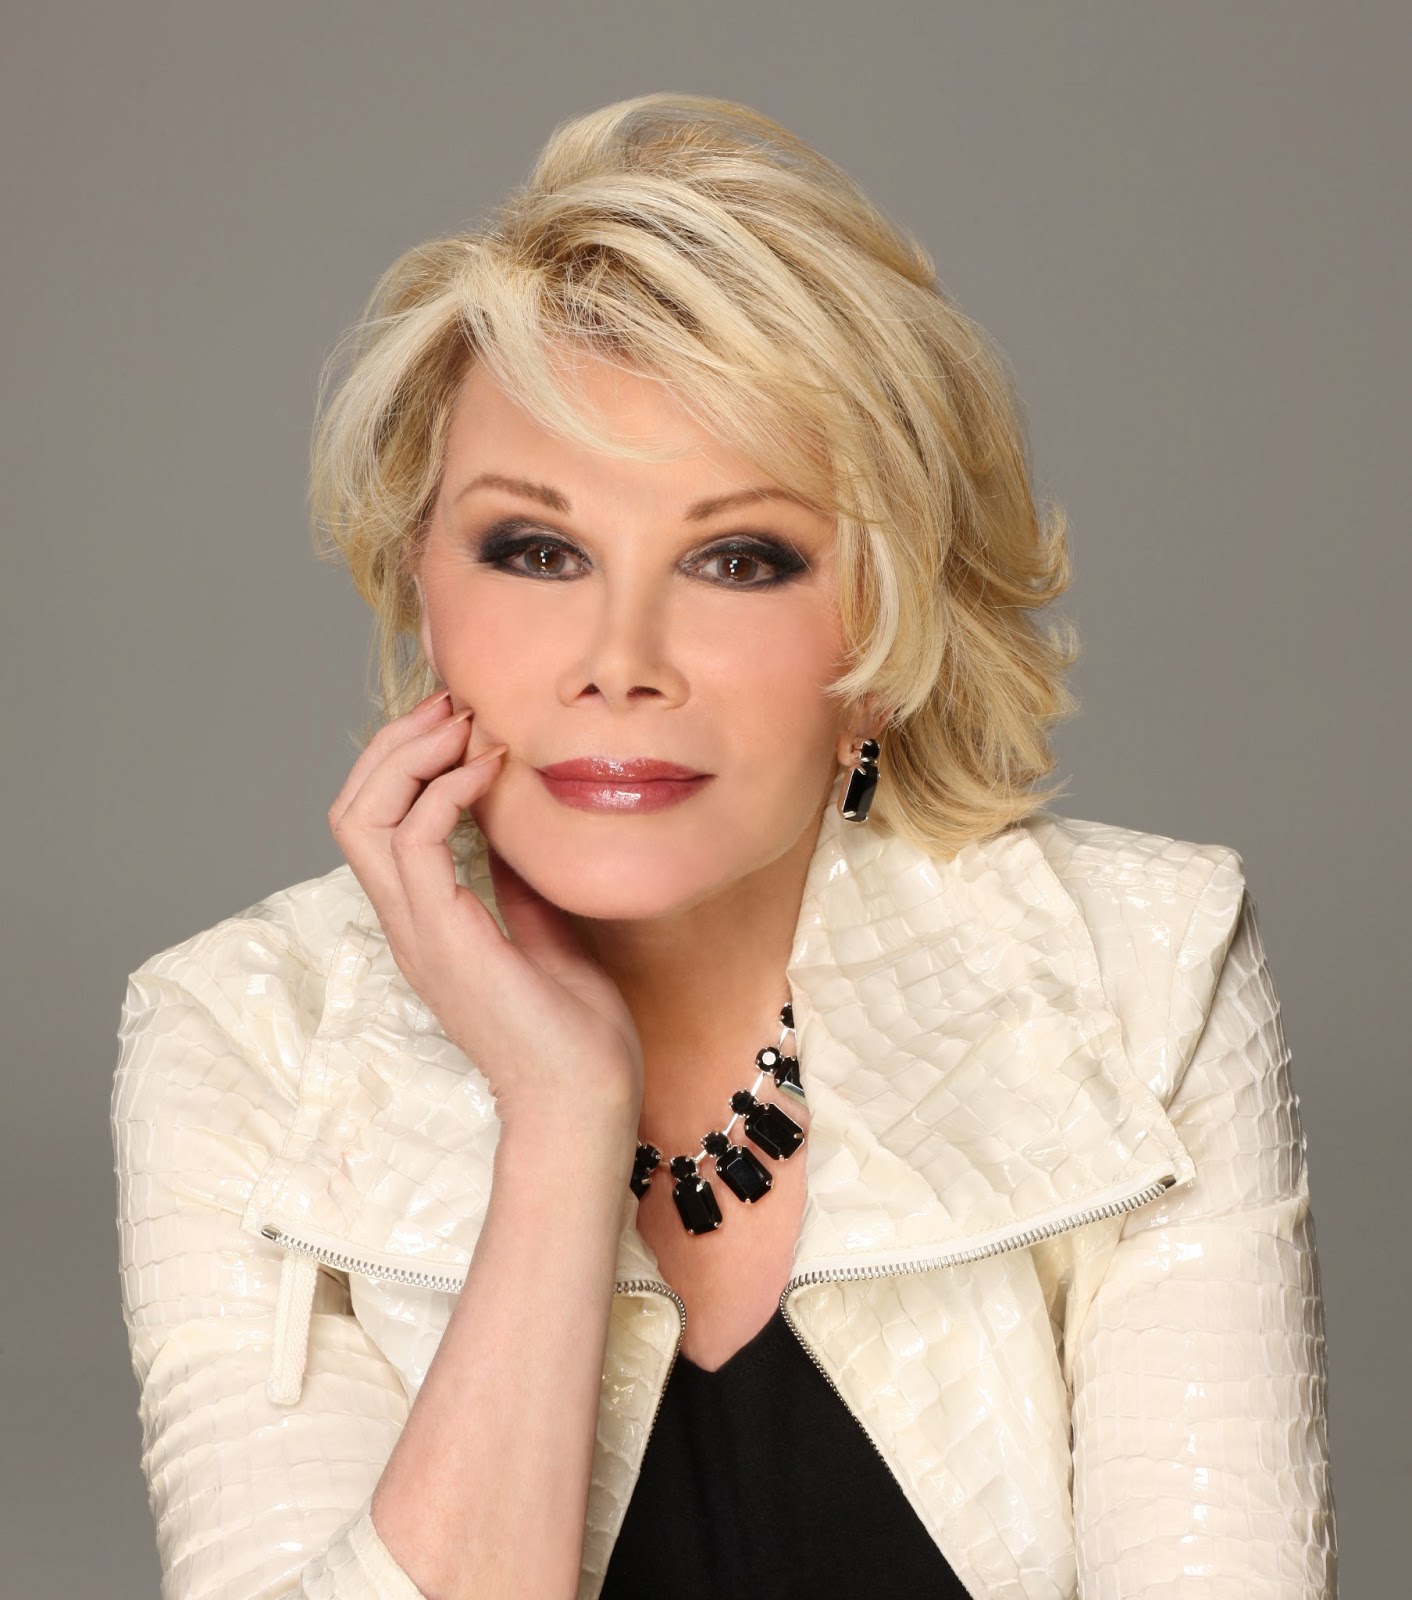 The Times New Roman Quoteworthy Joan Rivers 